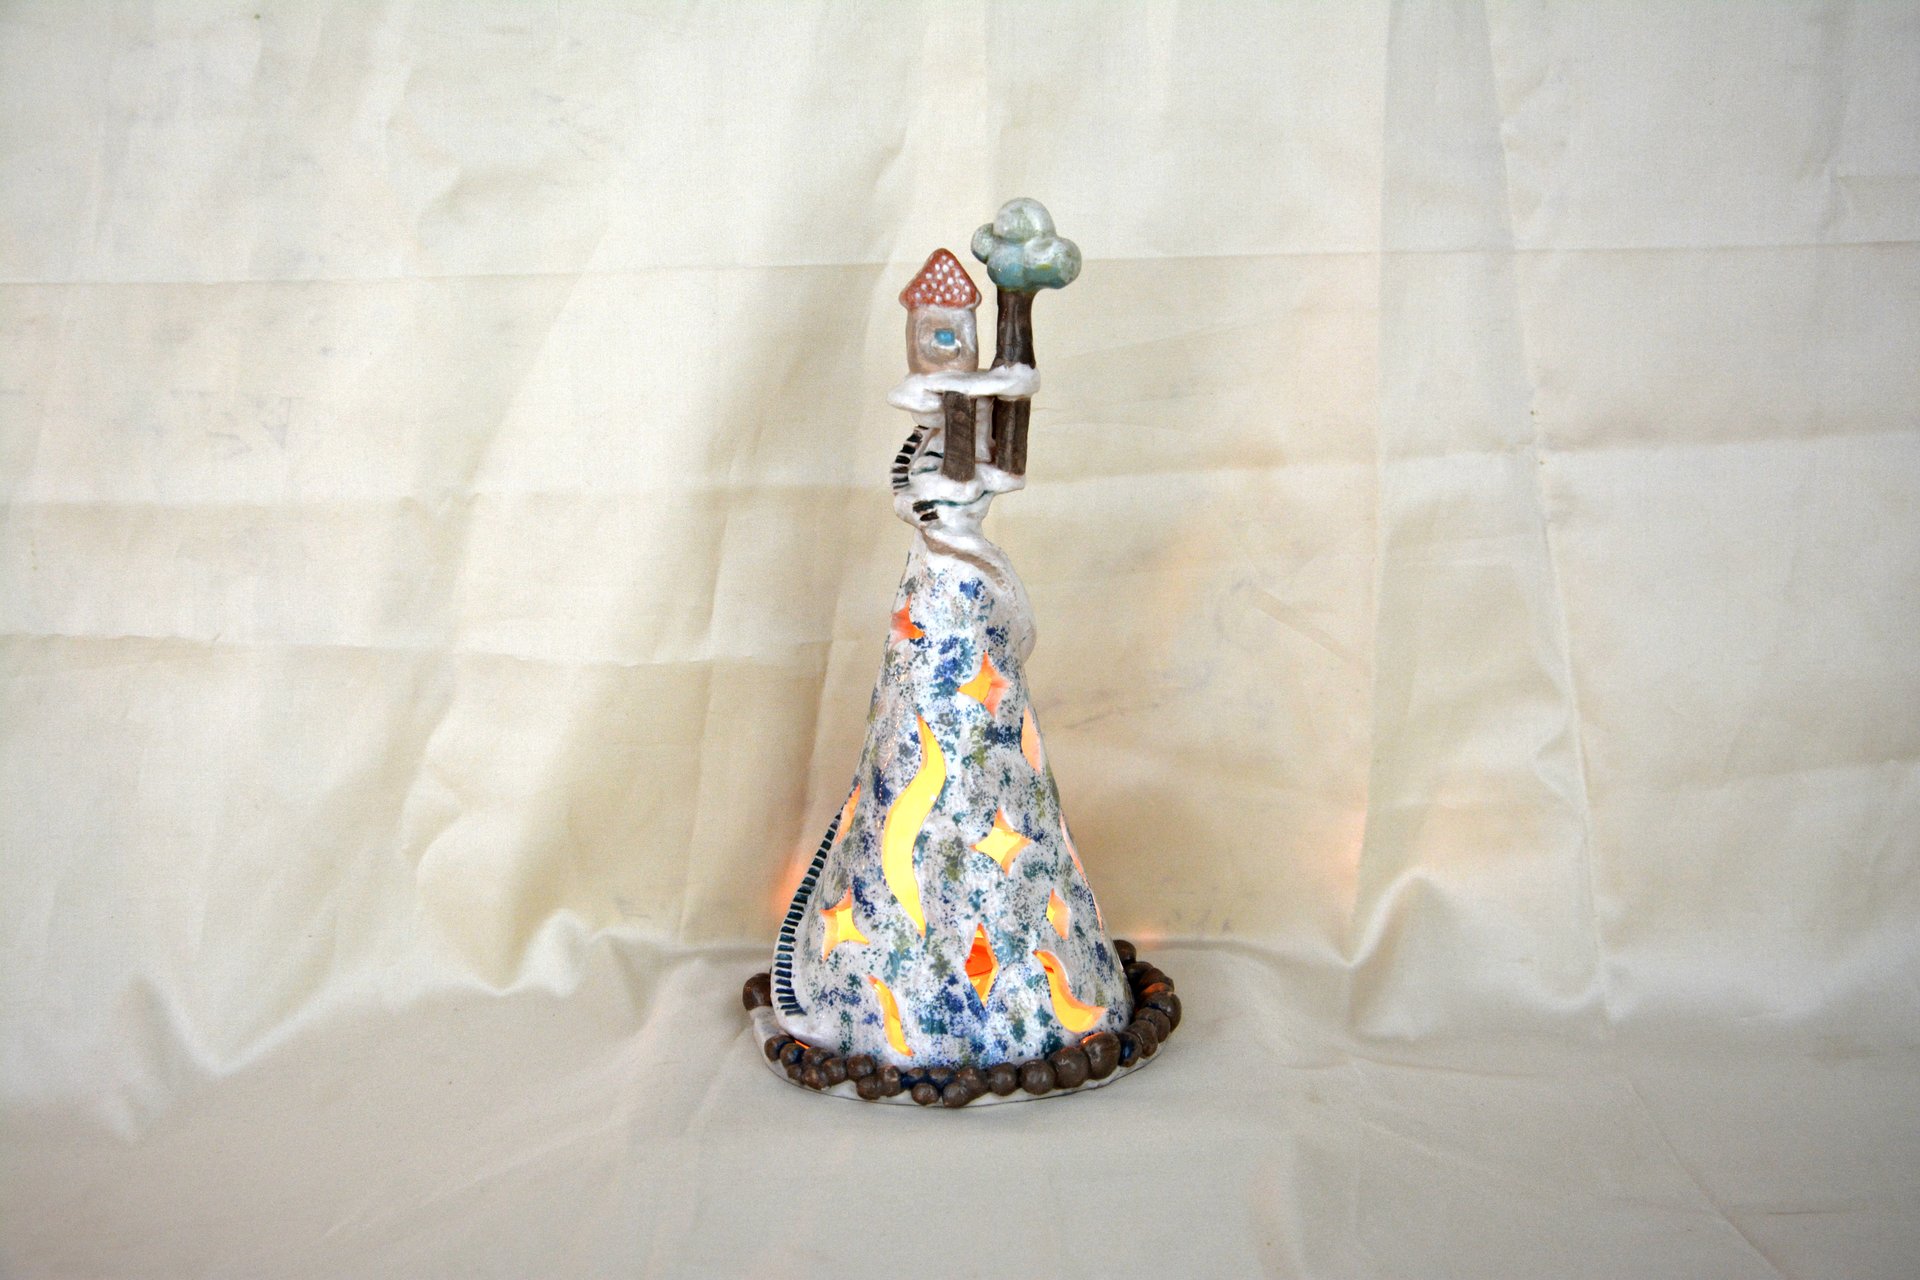 Night light with a small house - Ceramic new year's decor, height - 24 cm, diameter - 12 cm, photo 1 of 3.